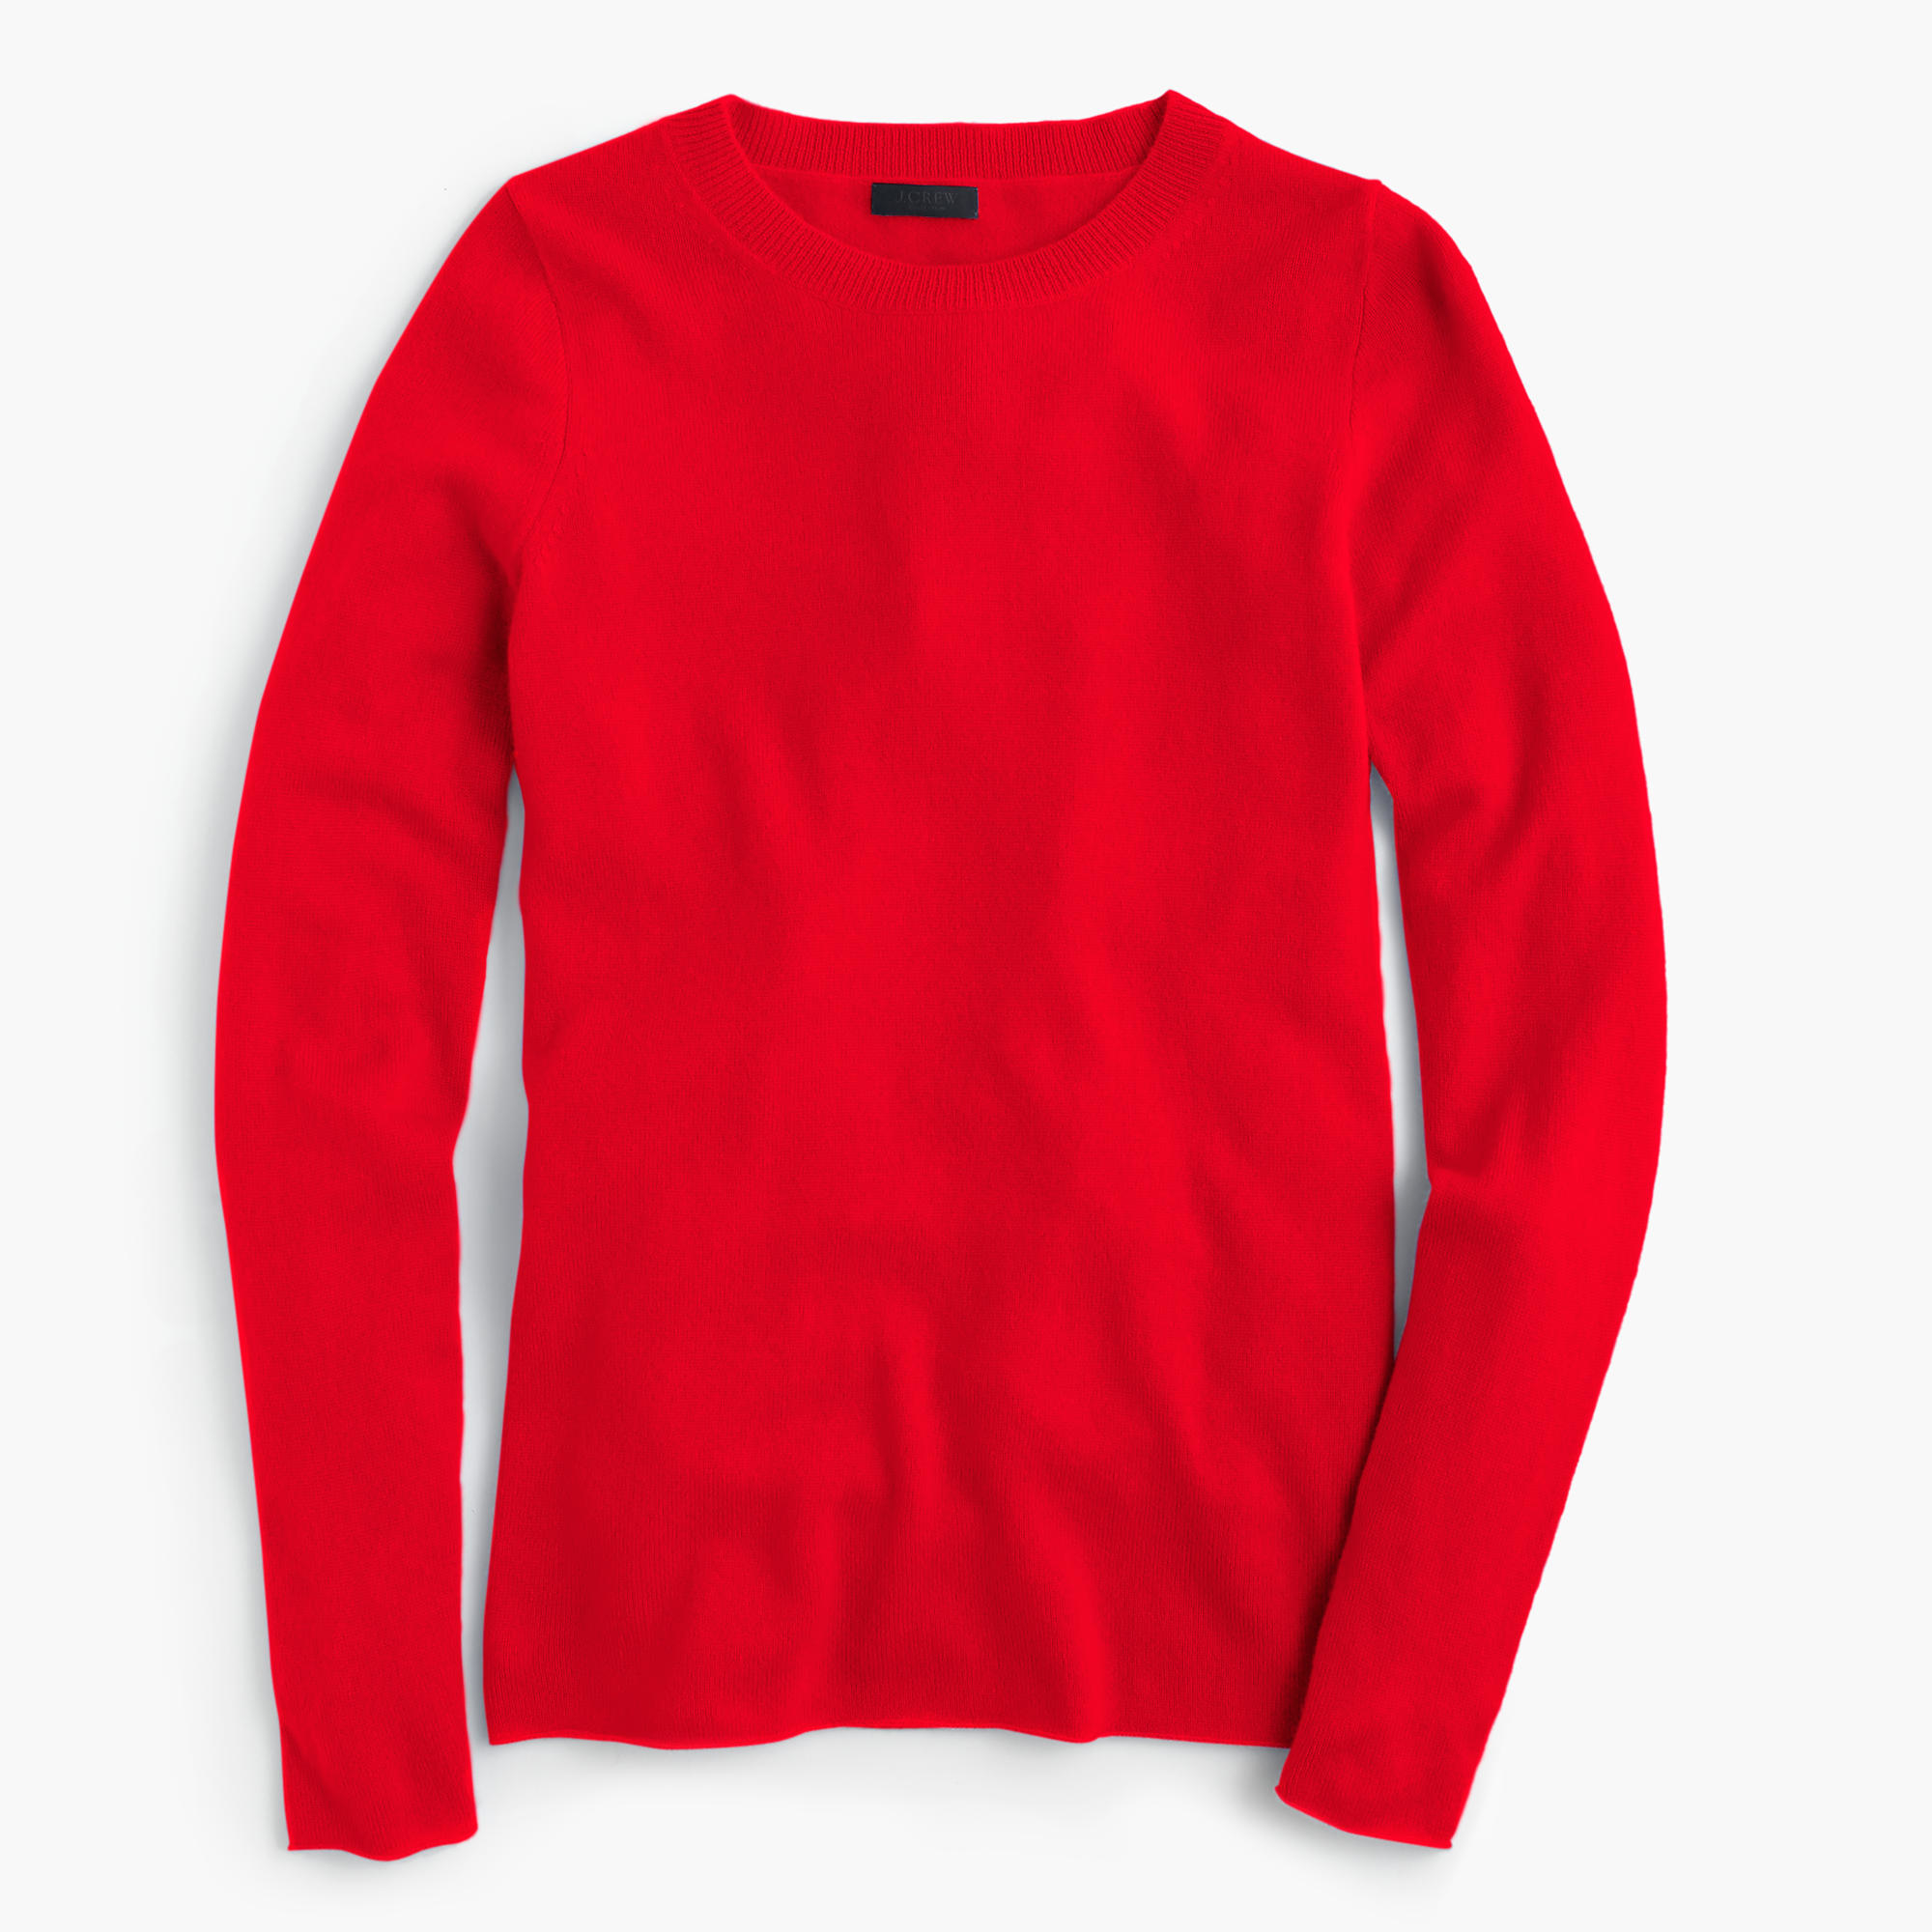 J.crew Italian Cashmere Long-sleeve T-shirt in Red (vivid flame) - Save ...